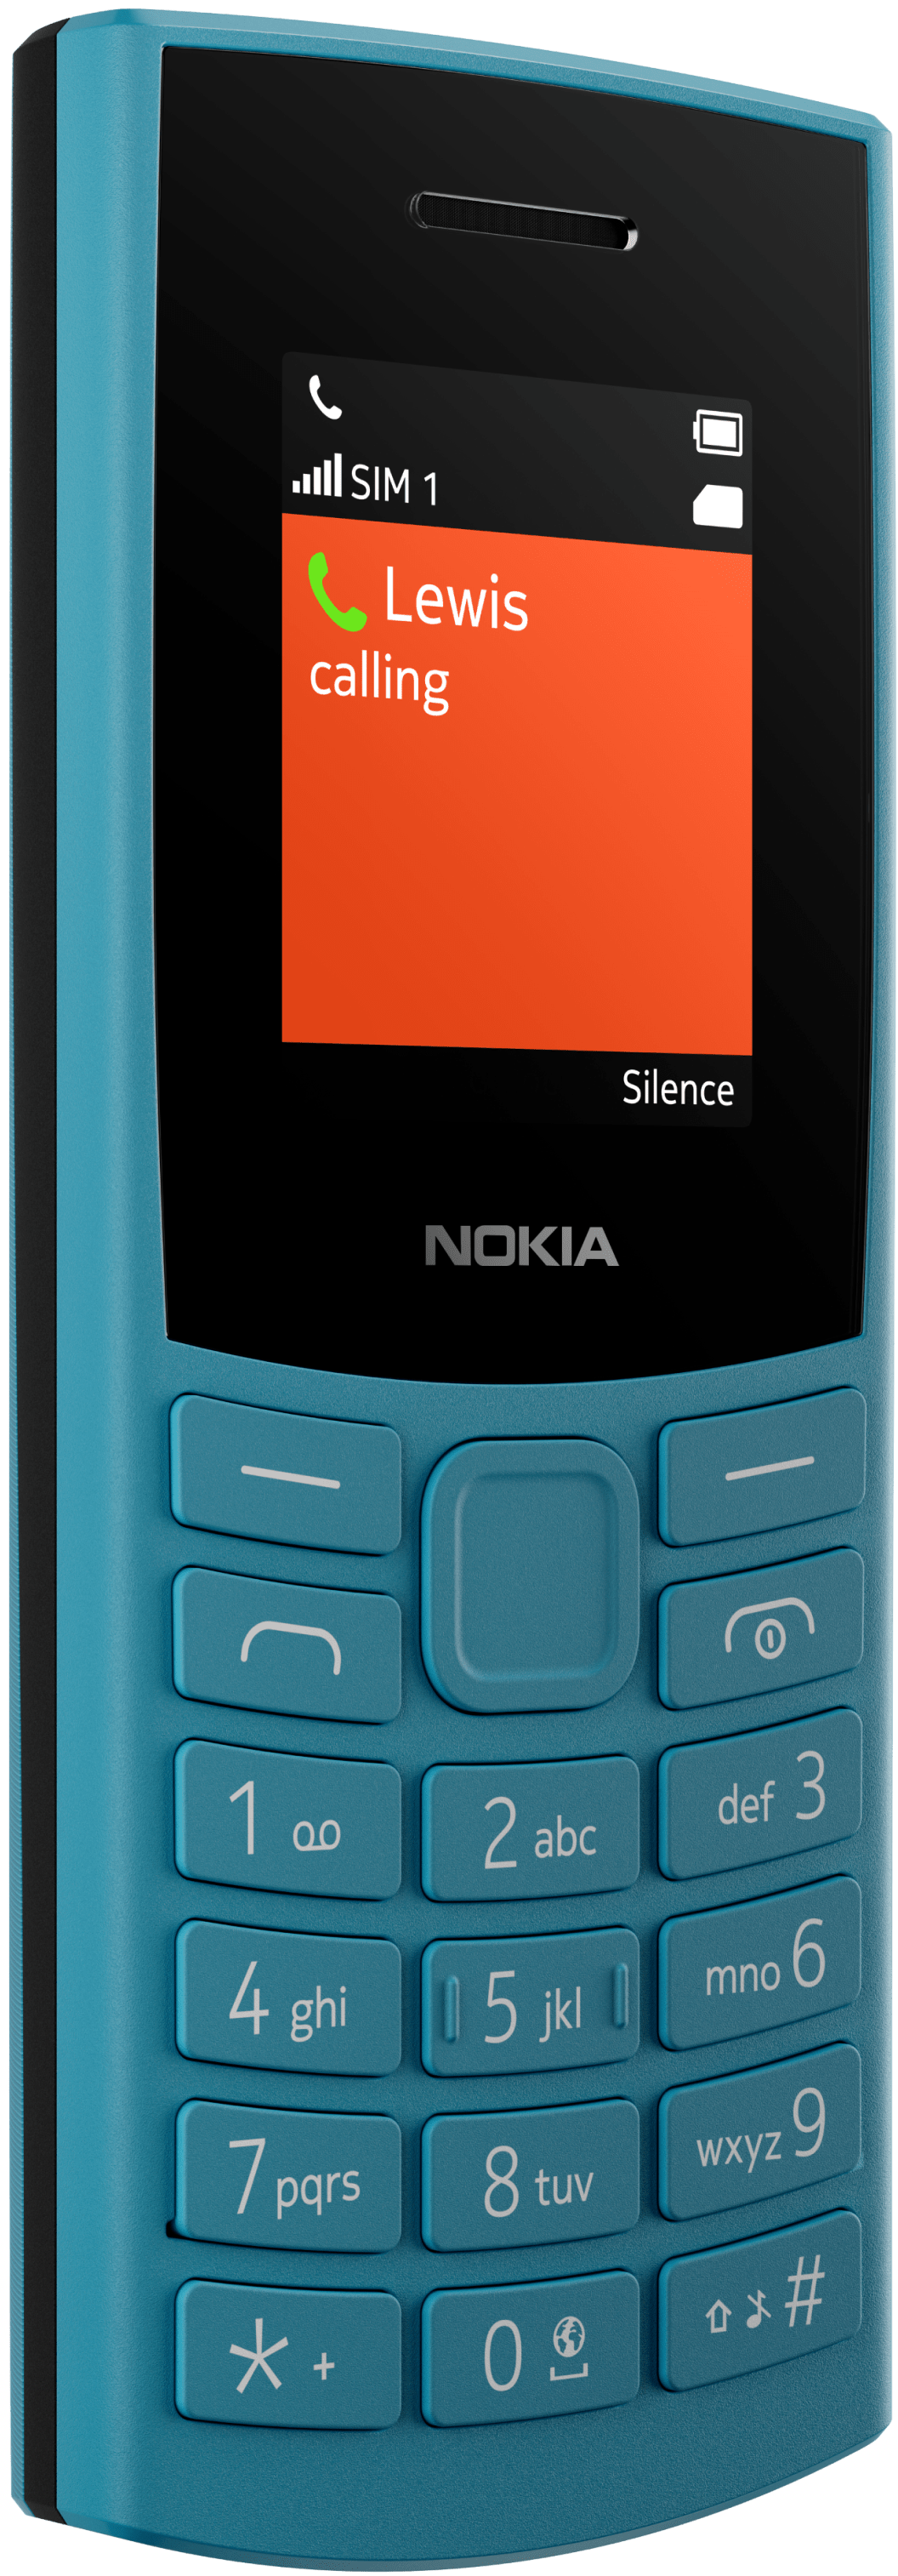 phone Nokia feature 105 with 4G internet